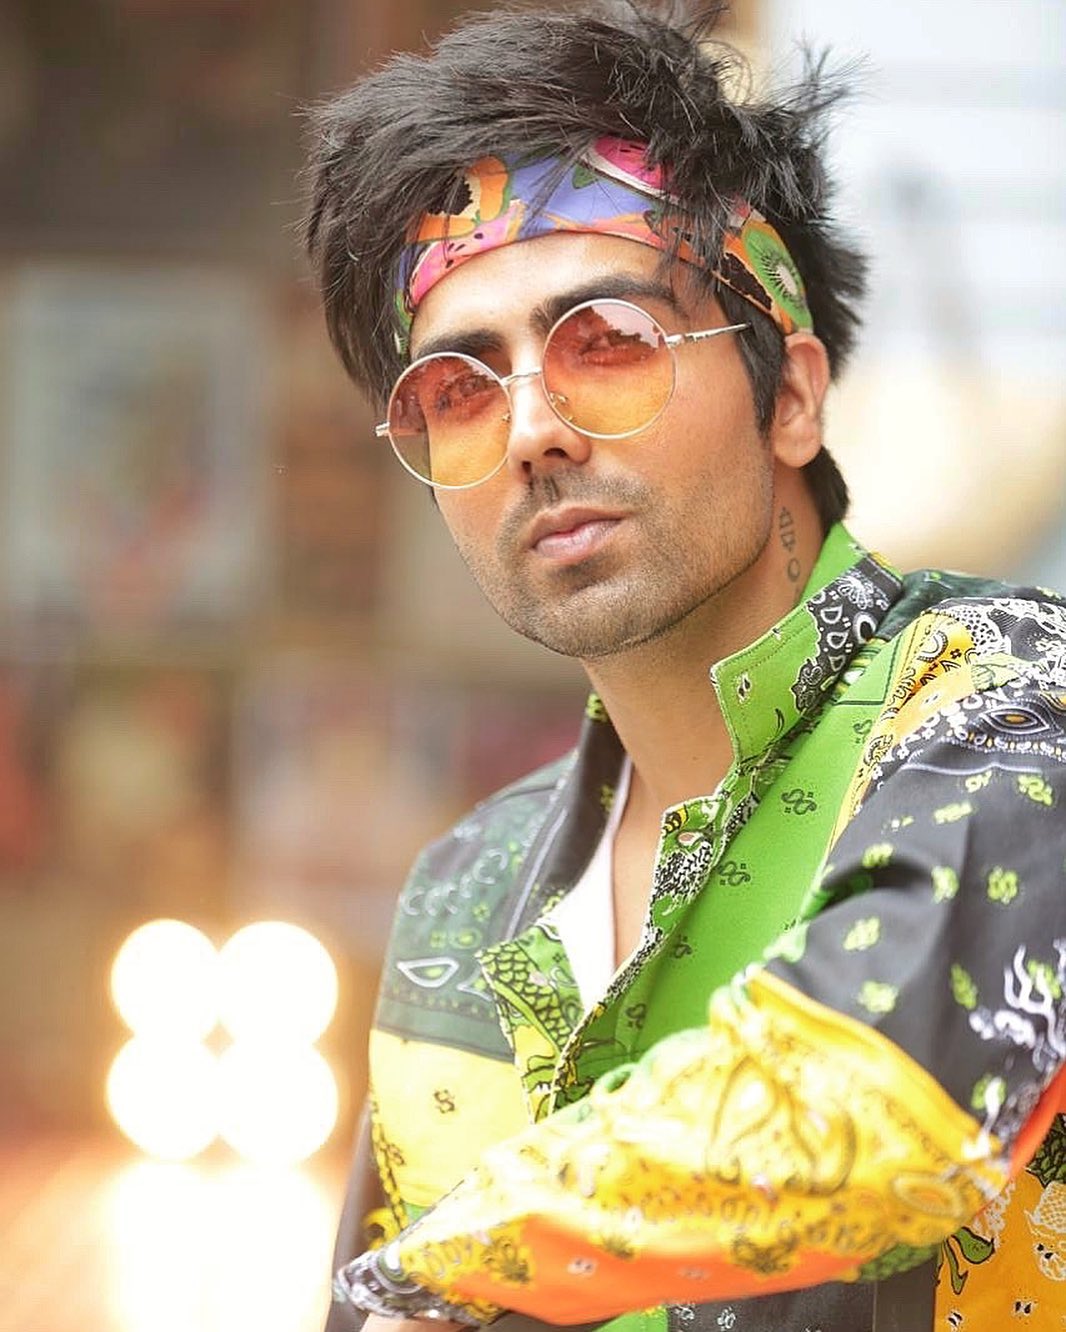 Best Hardy Sandhu Wallpapers 1080p HD Pictures, Images & Photos 2023